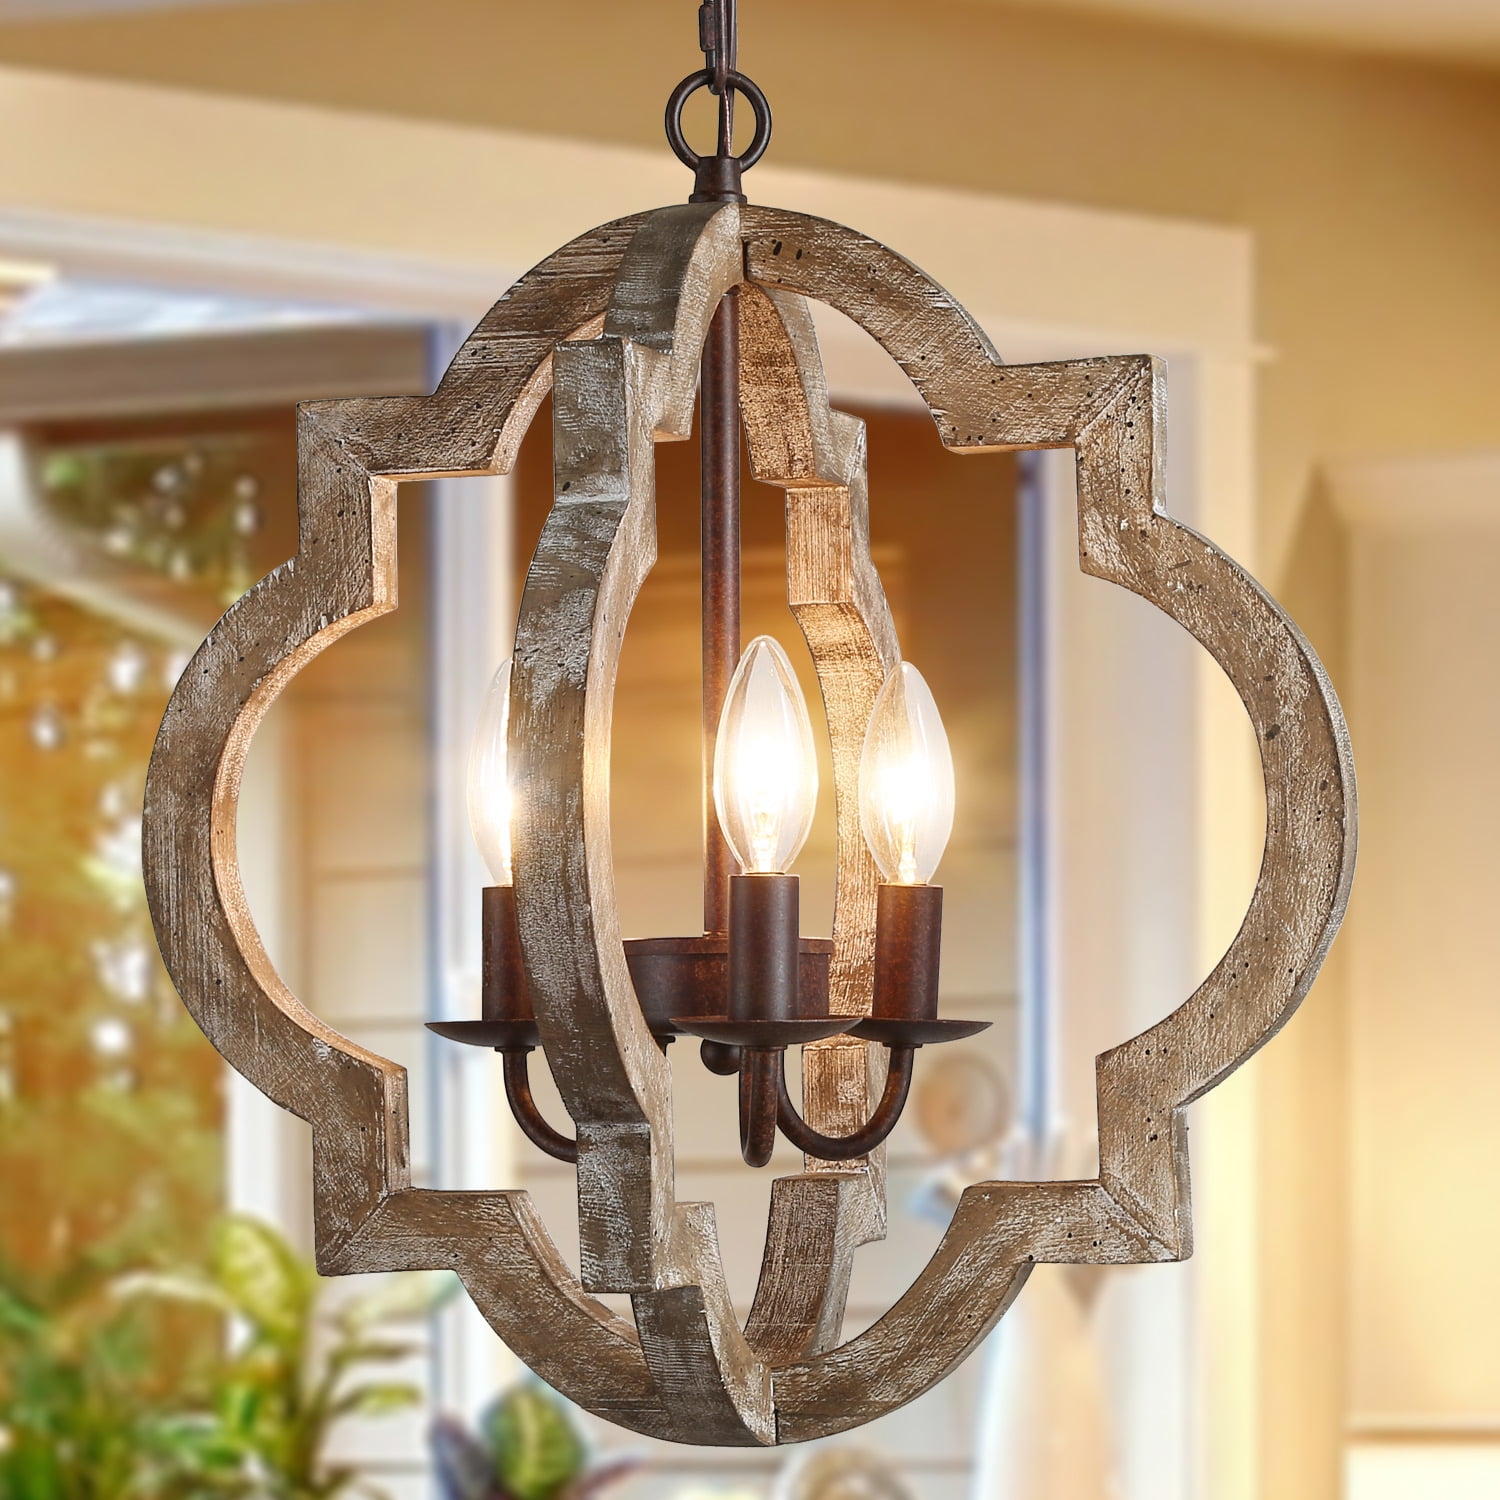 Lnc Farmhouse Rustic Chandeliers 3, Chandelier Height Over Kitchen Island